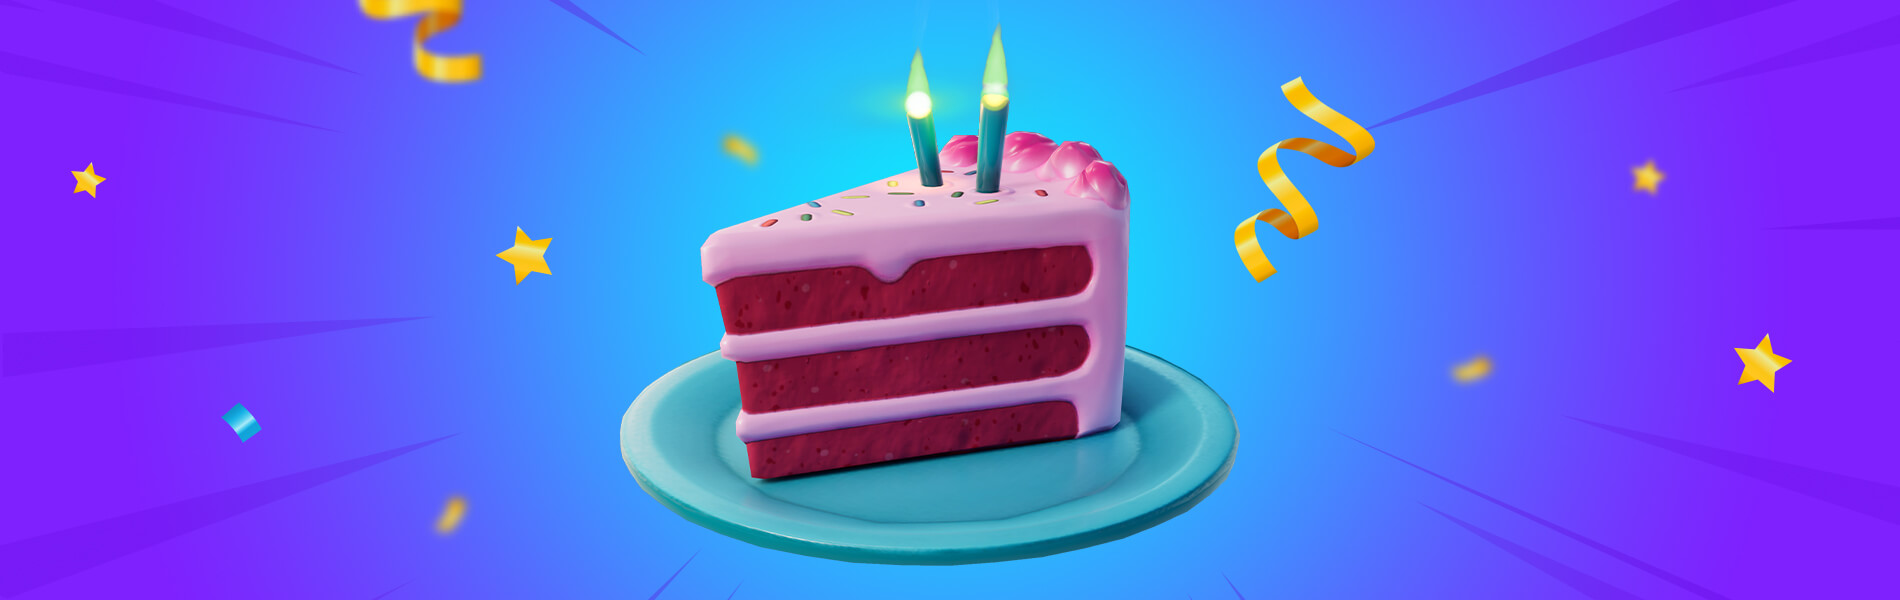 Complete Fortnite's 6th Birthday Quests for Free Rewards